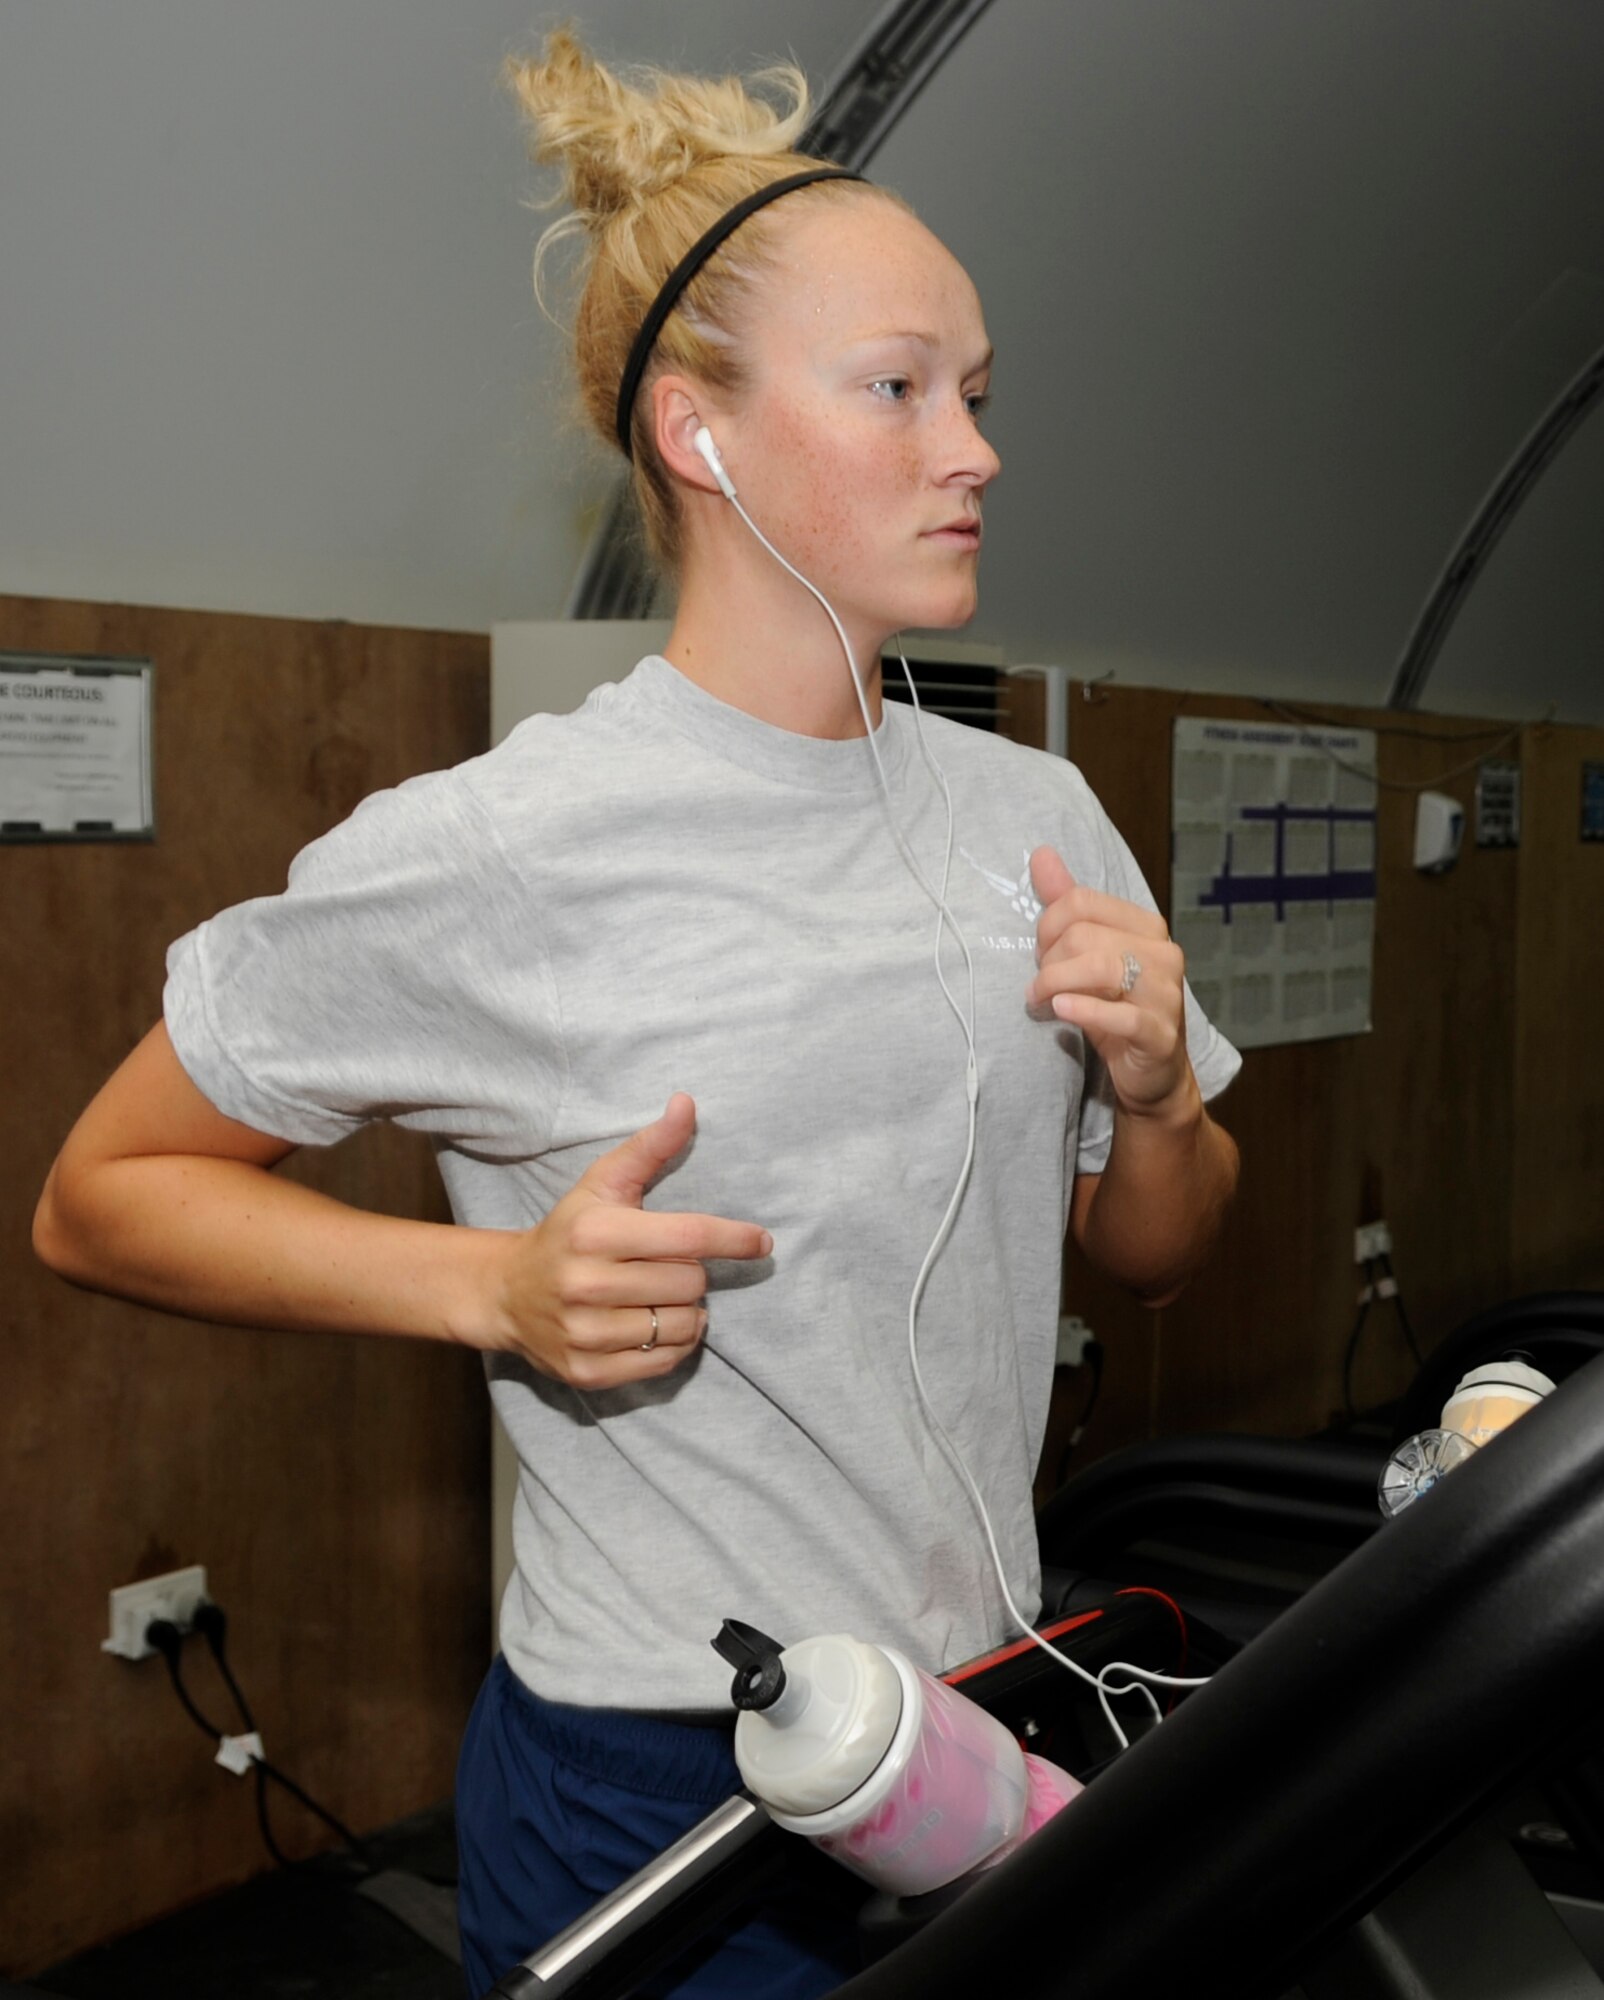 SOUTHWEST ASIA - 1st Lt. Anna Johnson, 960th Expeditionary Airborne Air Control Squadron, runs on a treadmill Nov. 18, 2009. Lieutenant Johnson joined the 450 mile club Nov. 17, 2009. The mile club is an incentive program offered by the 380th Expeditionary Force Support Squadron that gives servicemembers a free shirt according to the number of miles they run while deployed here. She is deployed from Tinker Air Force Base, Okla., and hails from Springfield, Ore.(U.S. Air Force photo/Senior Airman Stephen Linch)
